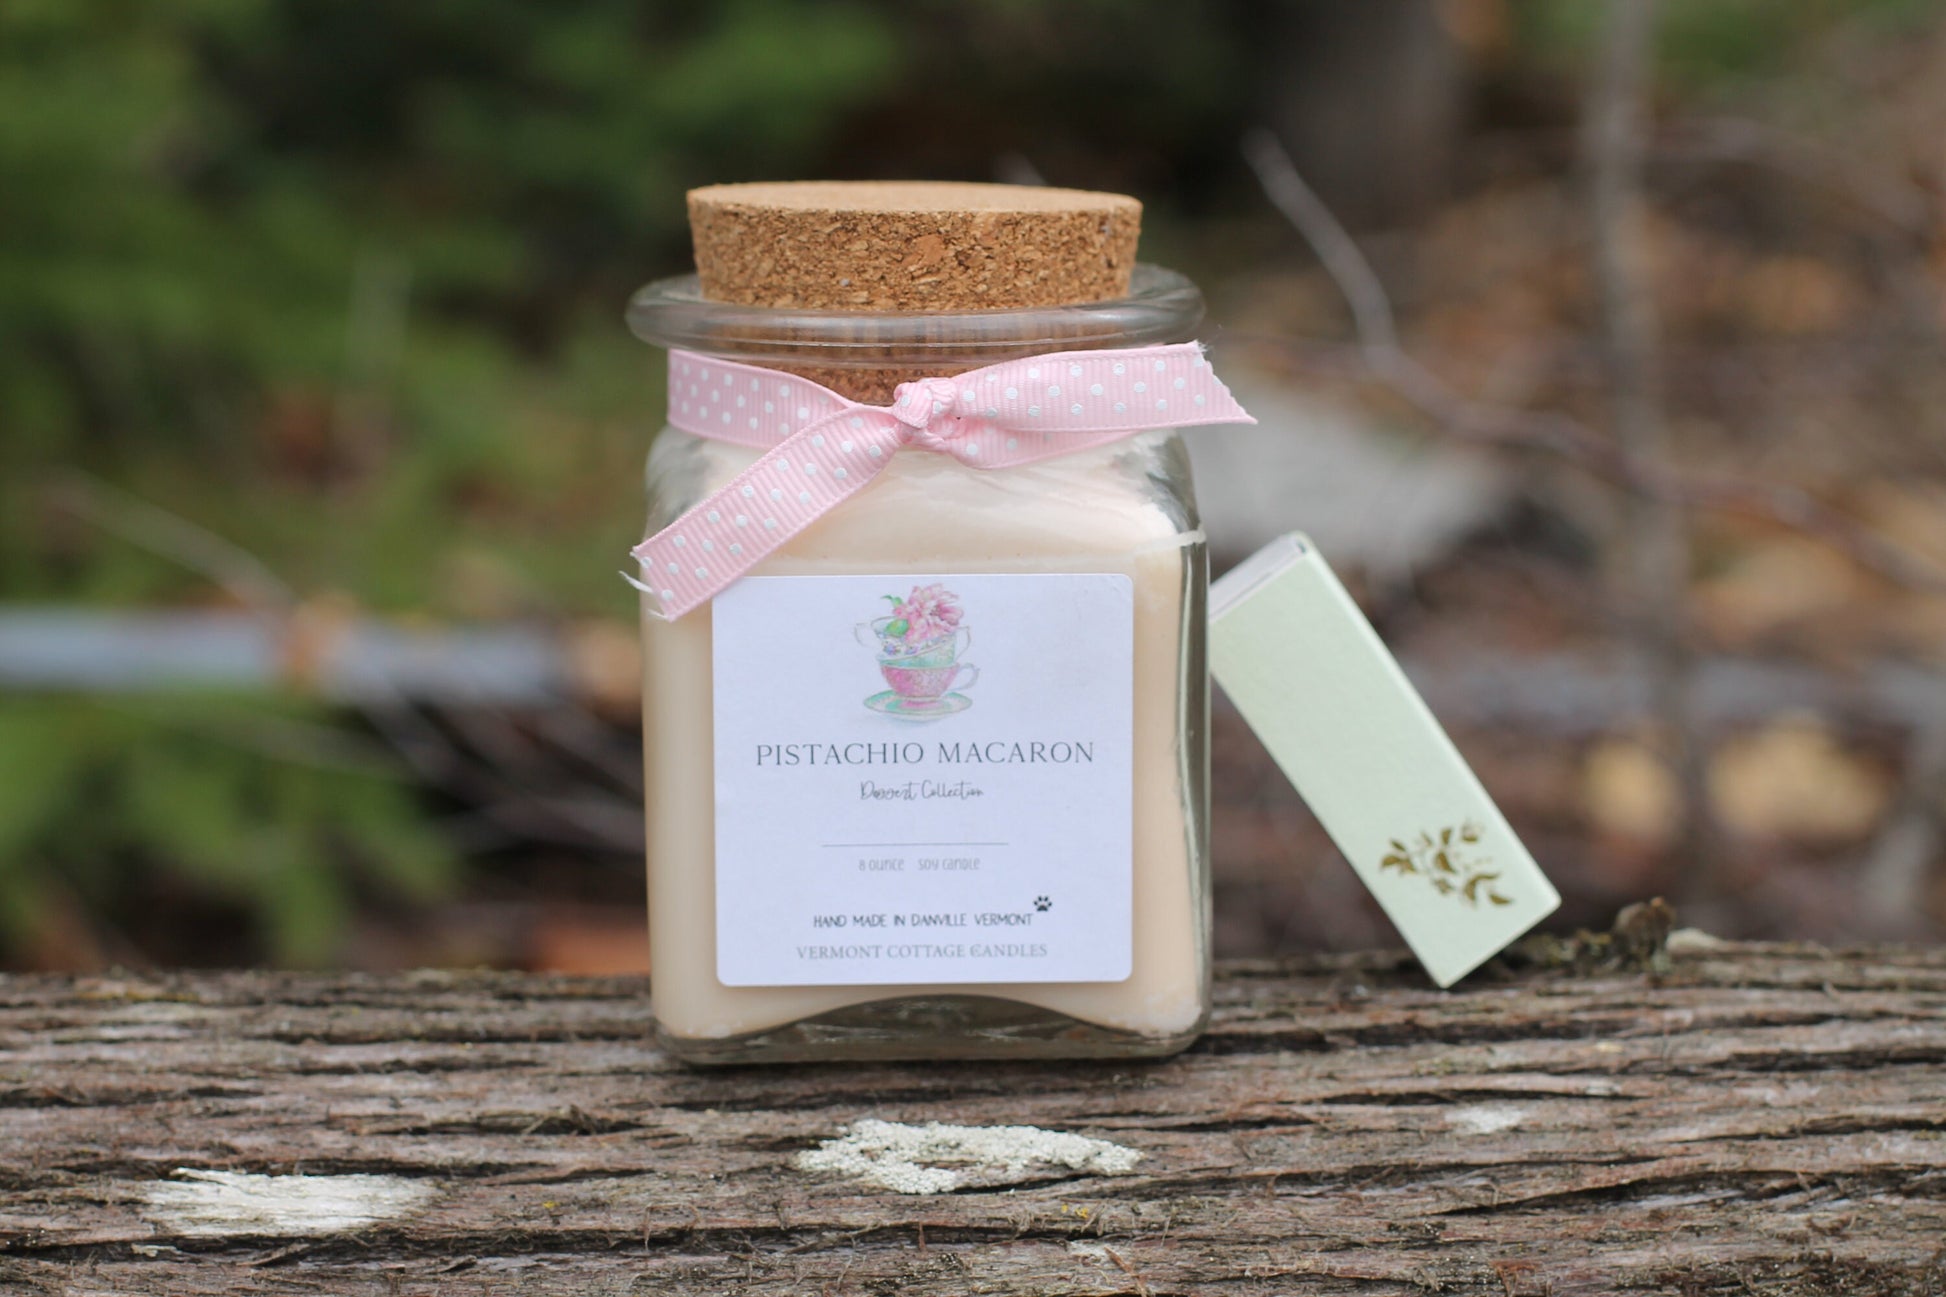 Dessert Collection Hand-poured Natural Soy Candle-8.5oz Recycled Glass with Cork Top-Belle Savon Vermont